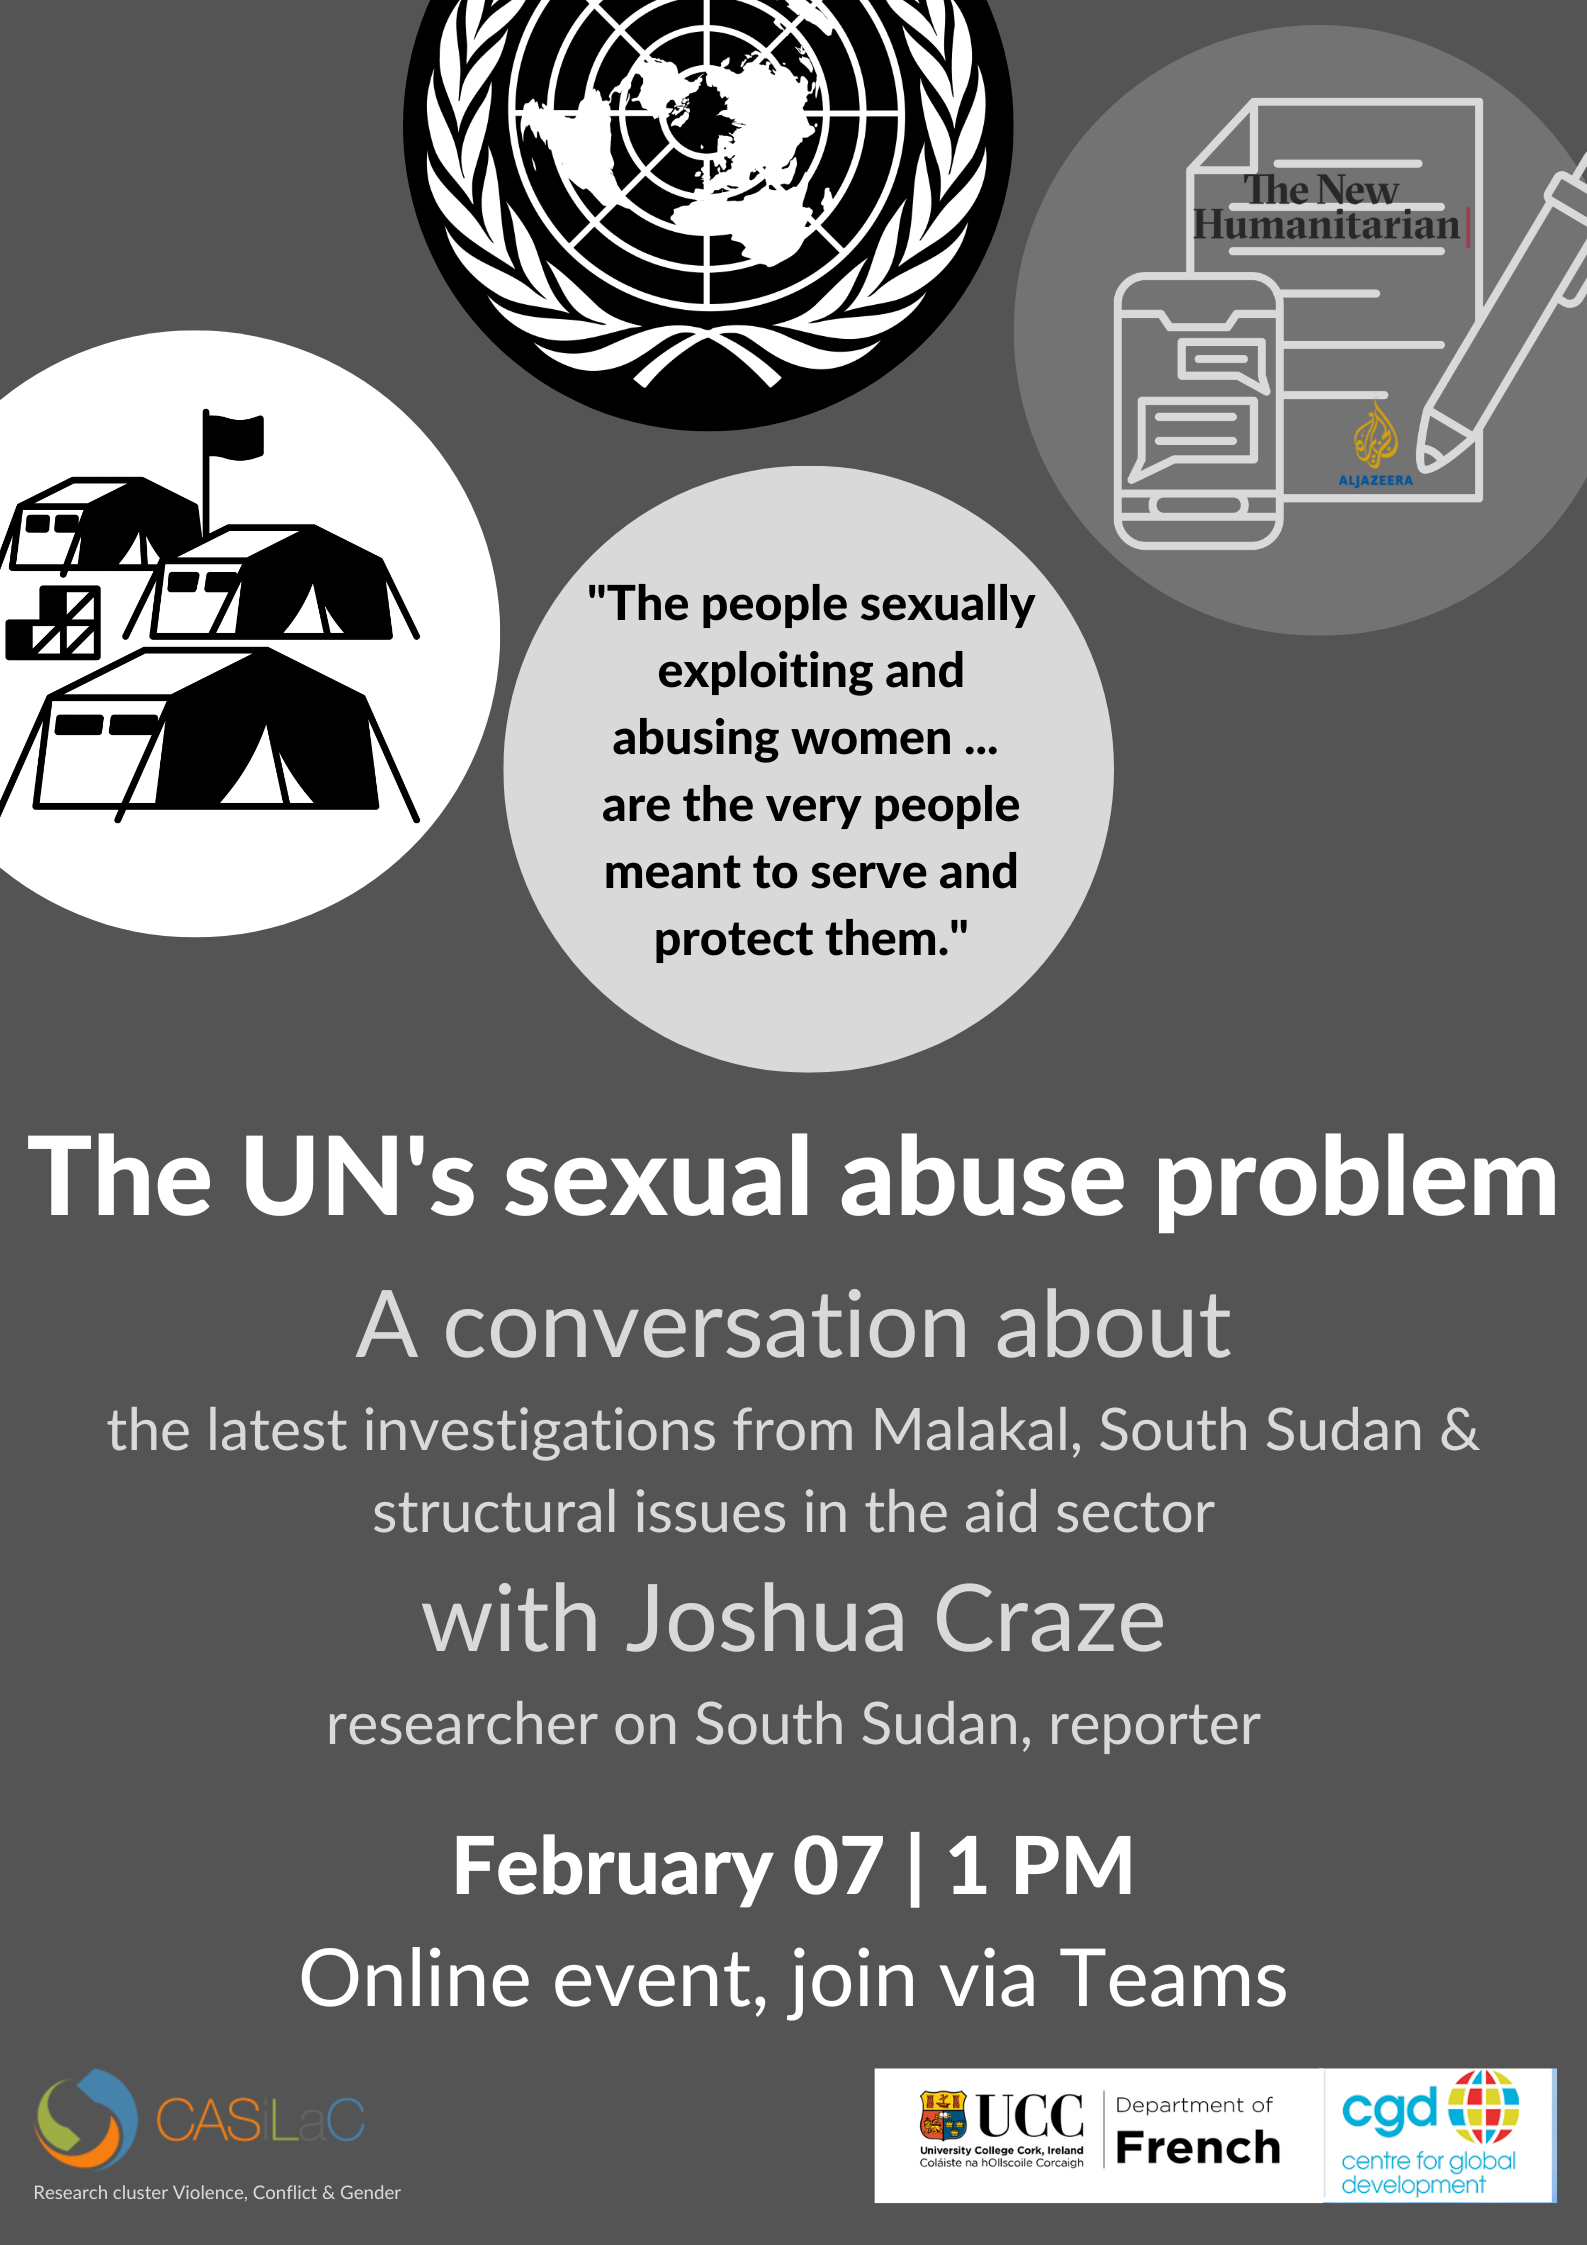 A critical conversation on the United Nation’s alleged sexual abuse problem -  online event via Teams on Tuesday, February 7, at 1 pm.